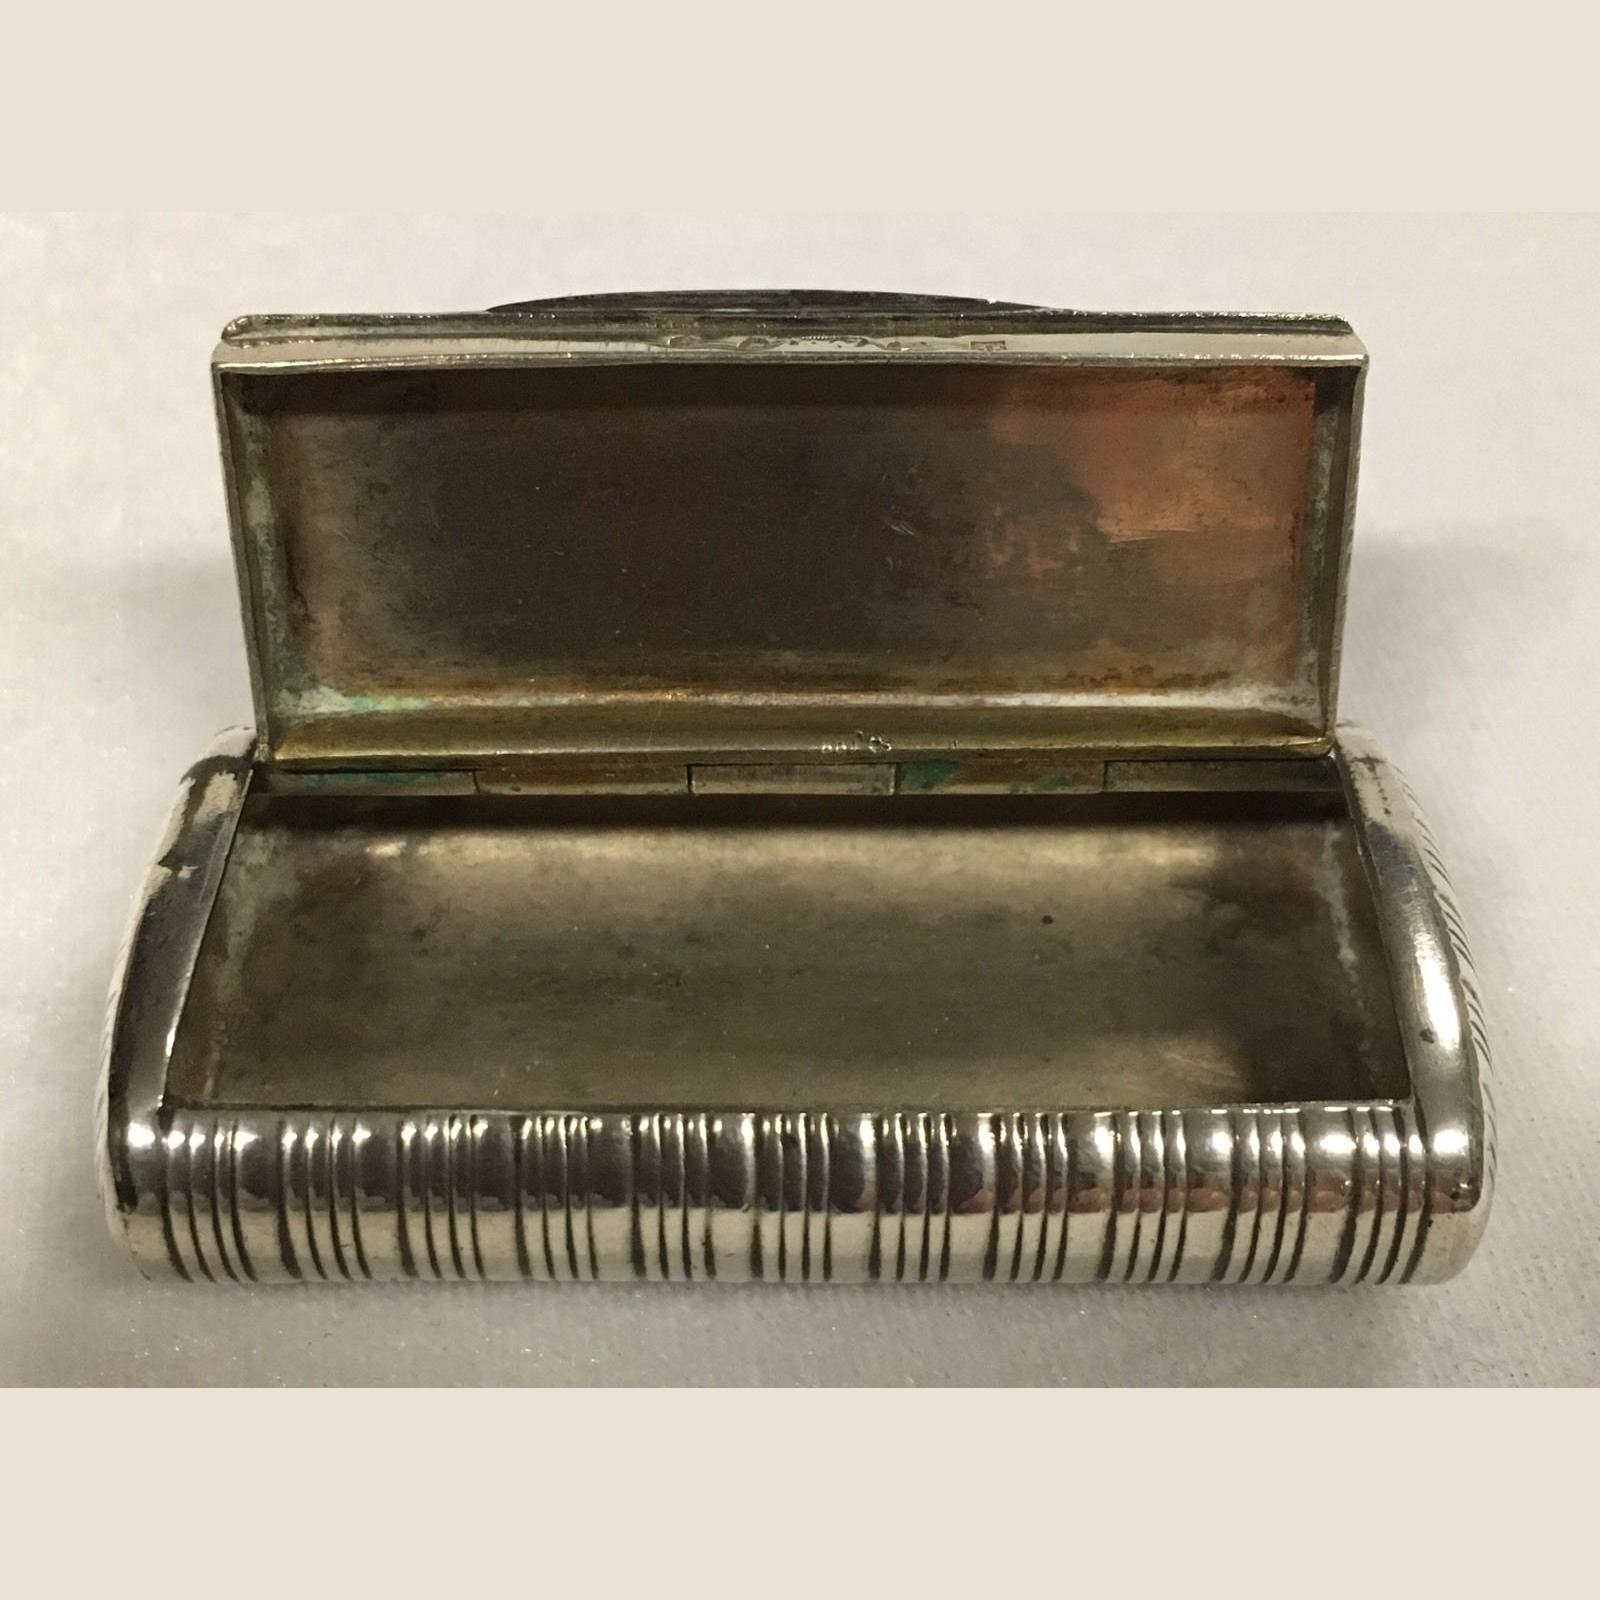 Silver plated book-shaped snuff box, England, 1860-1876